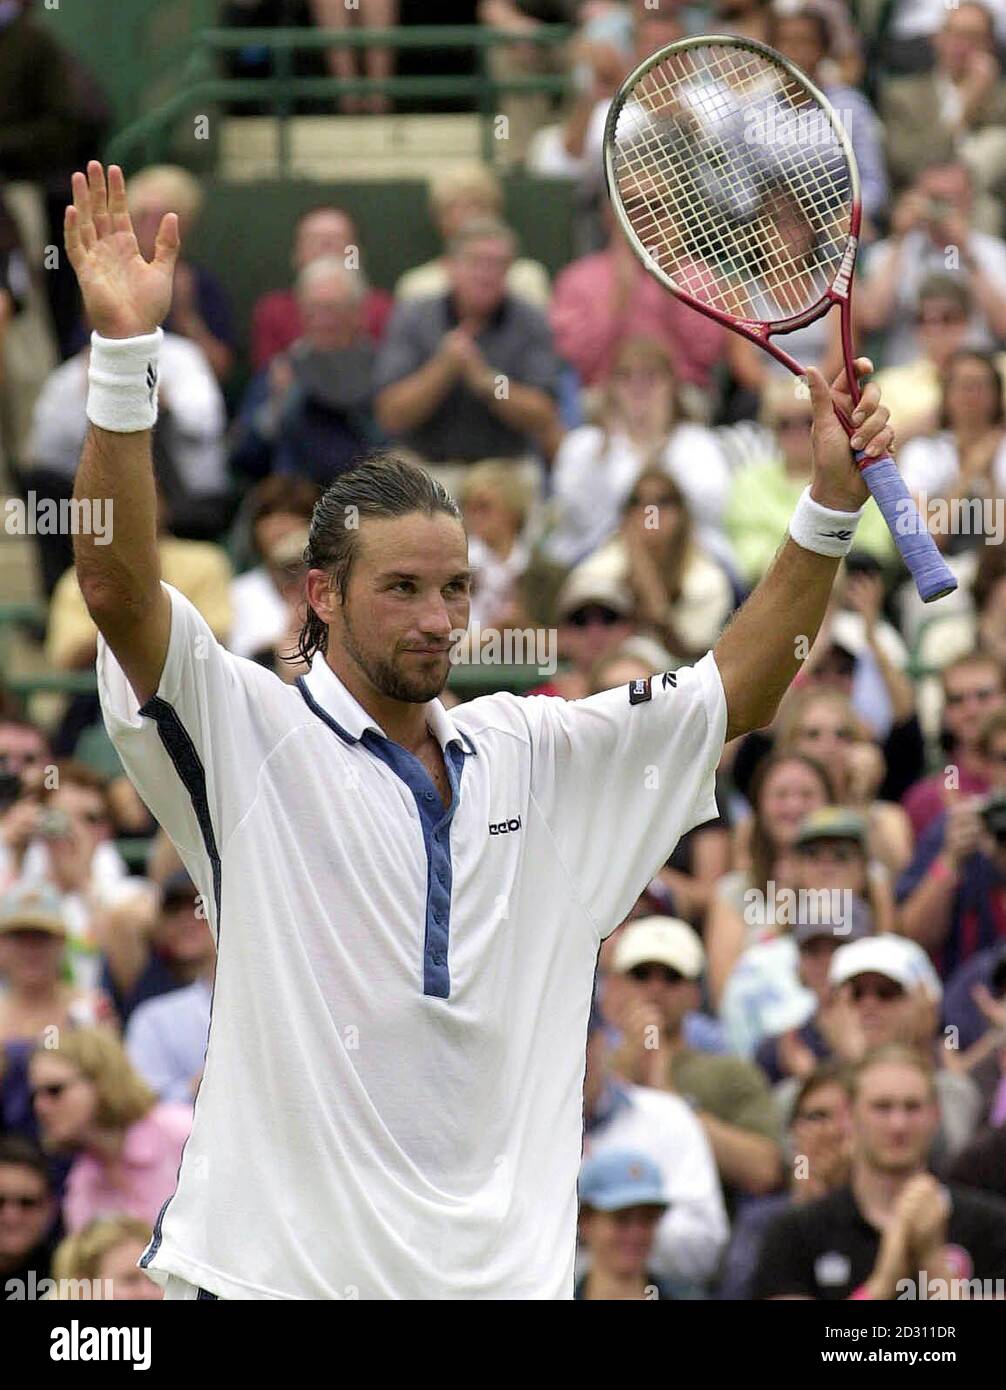 NO COMMERCIAL USE:   Australia's Pat Rafter celebrates his 6/2 7/6 6/3 victory over Rainer Schuttler of Germany during the Lawn Tennis Championships at Wimbledon. Stock Photo